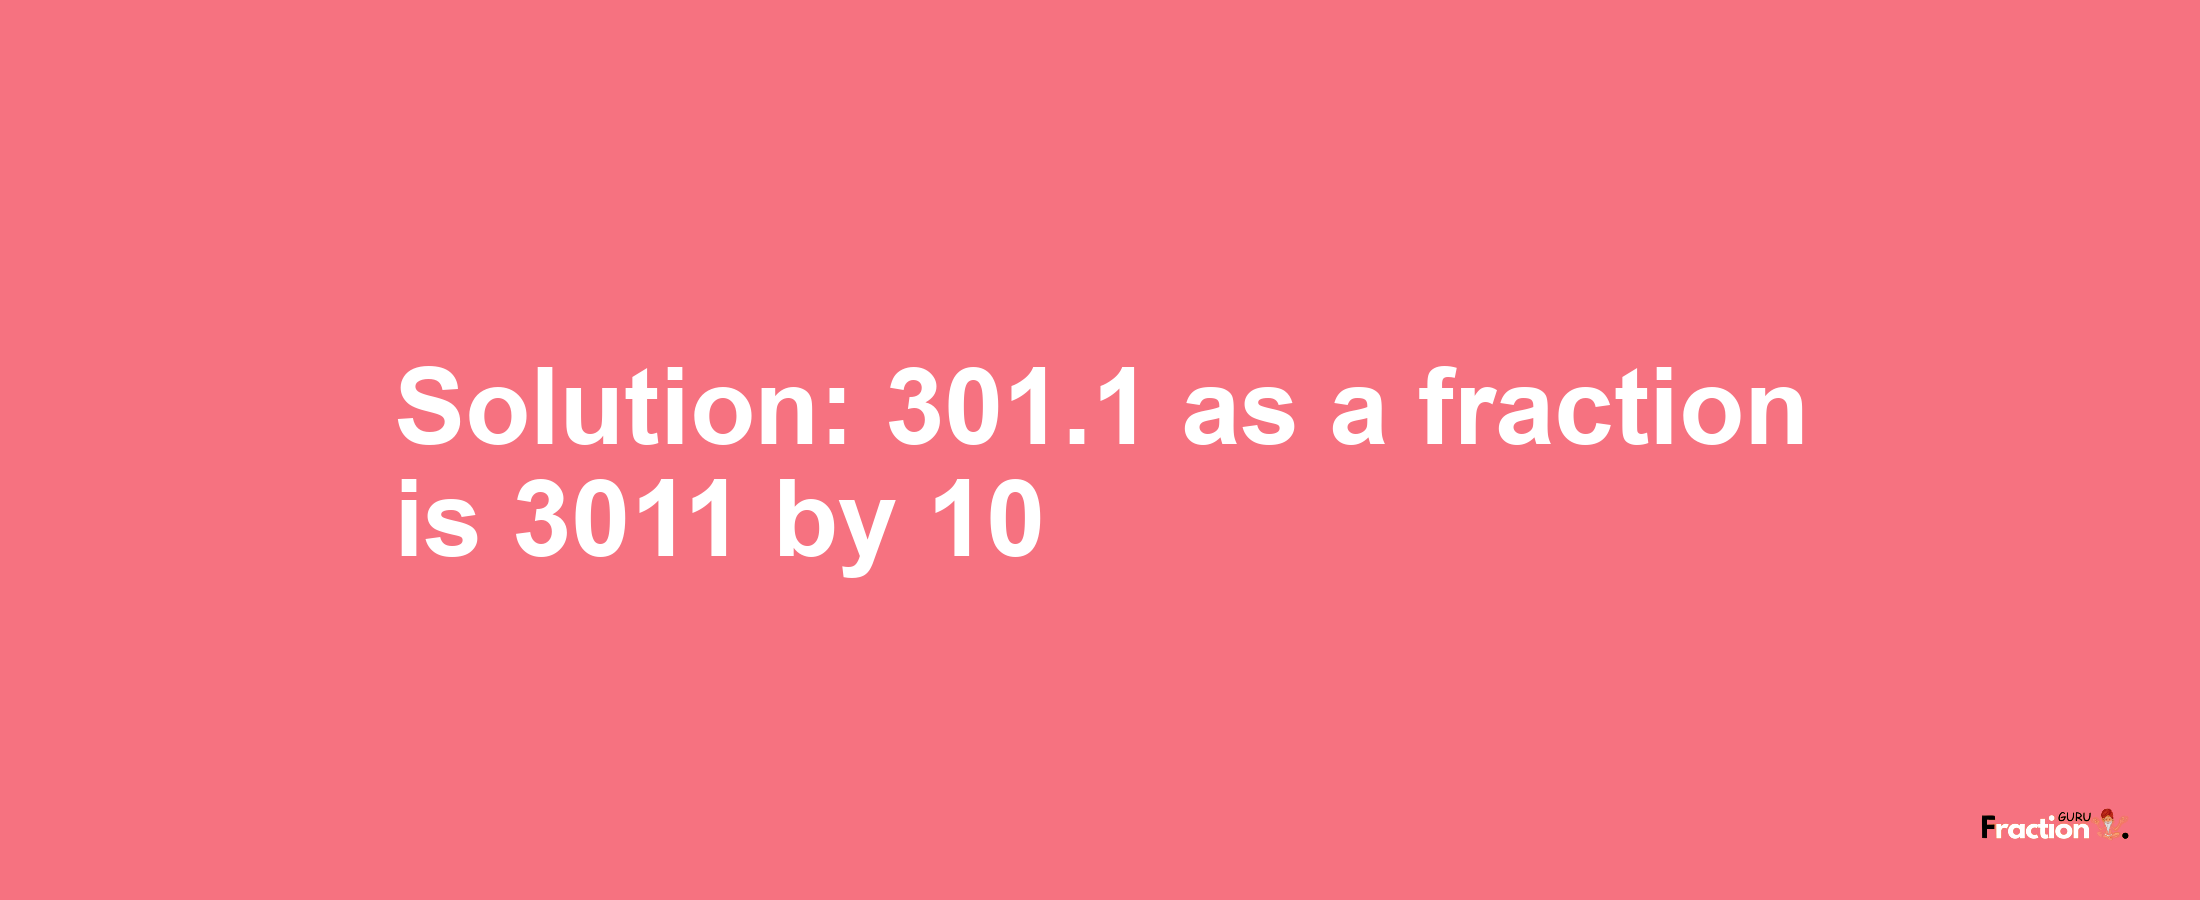 Solution:301.1 as a fraction is 3011/10